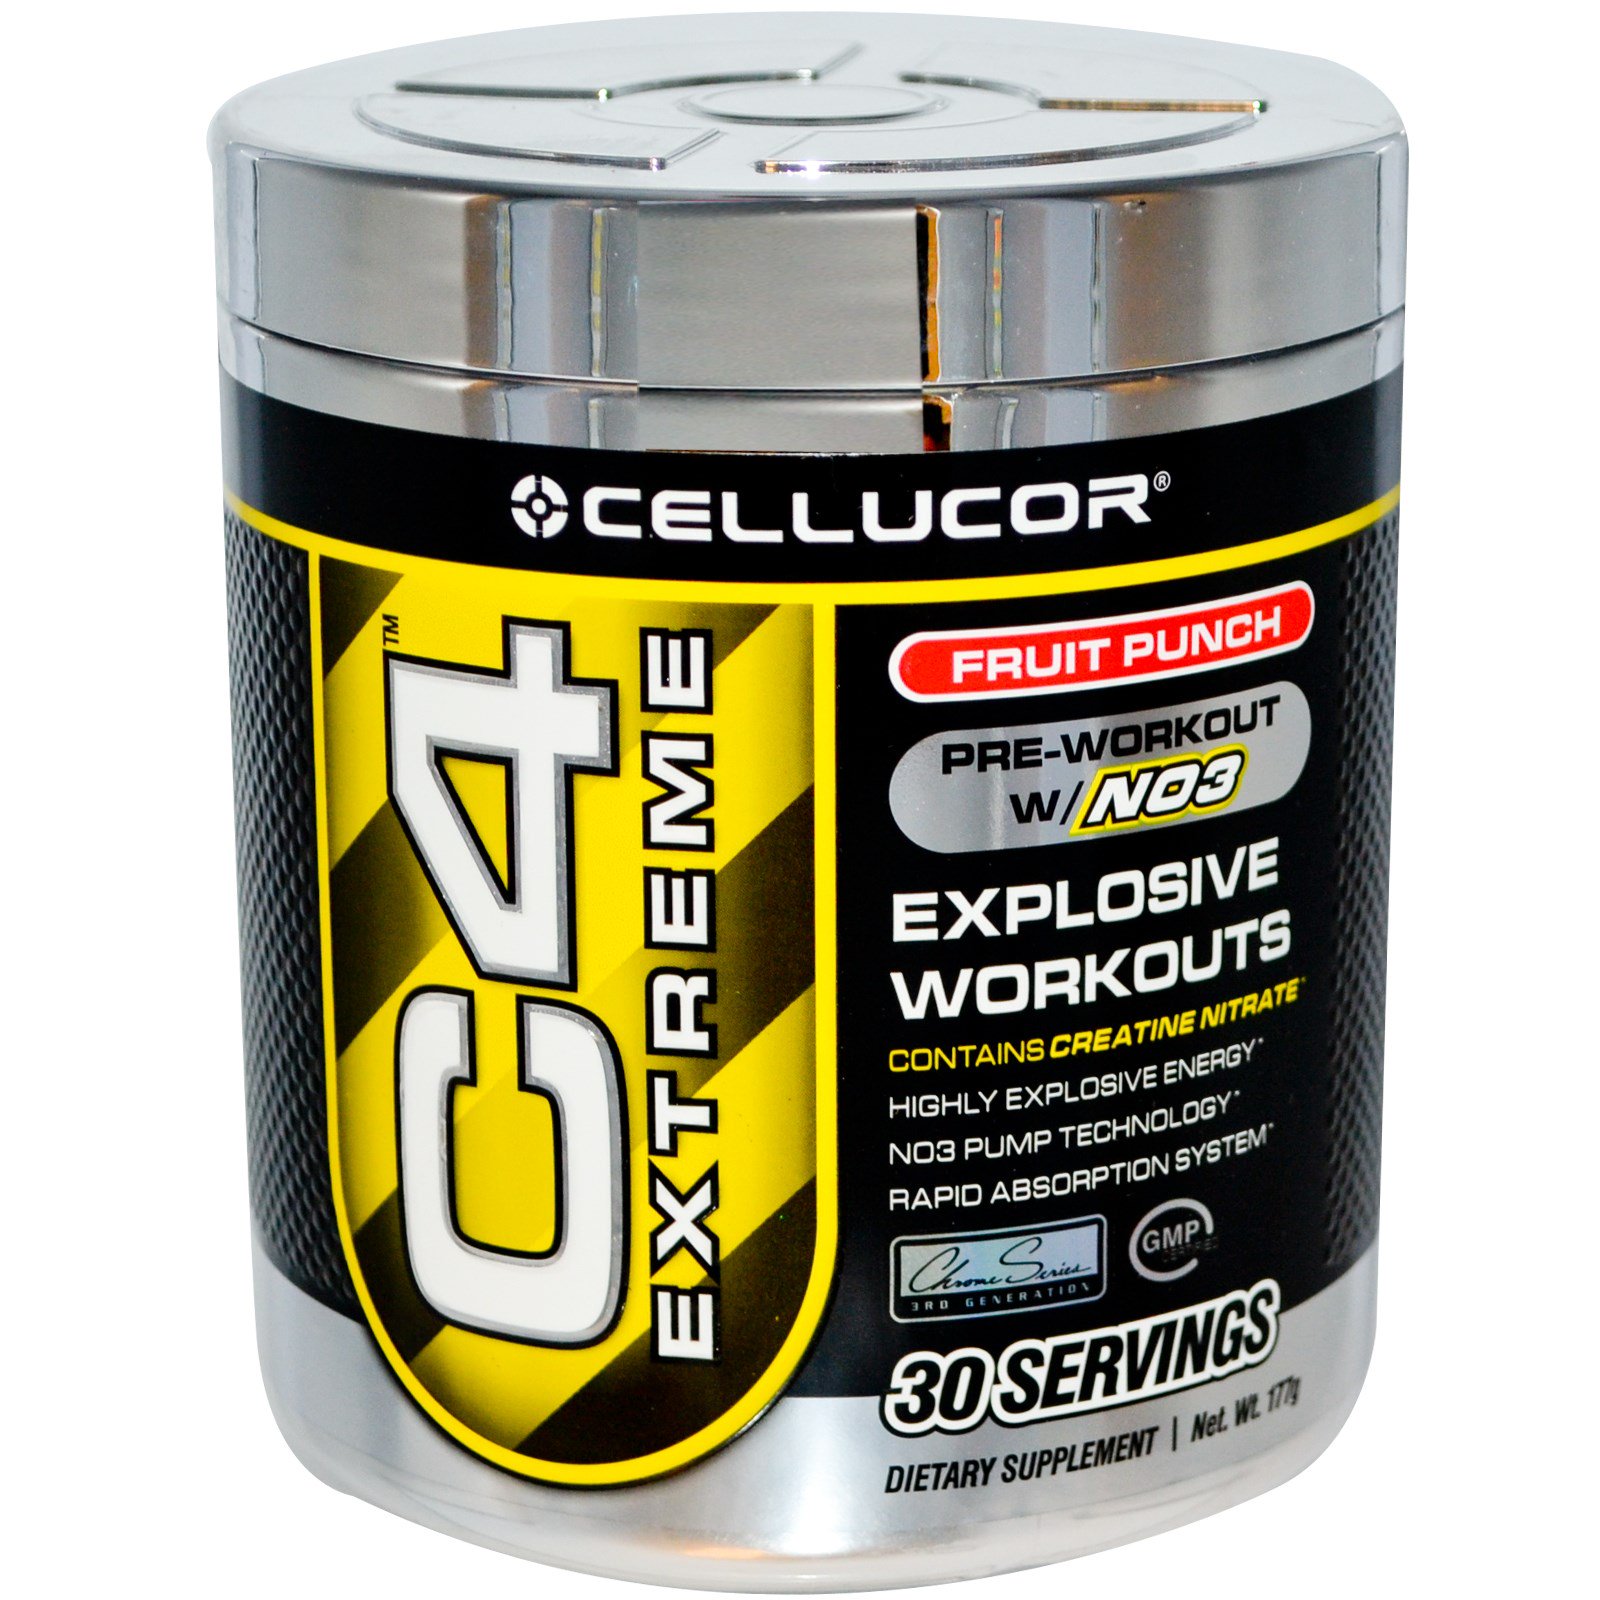 Simple C4 Extreme Pre Workout for Weight Loss